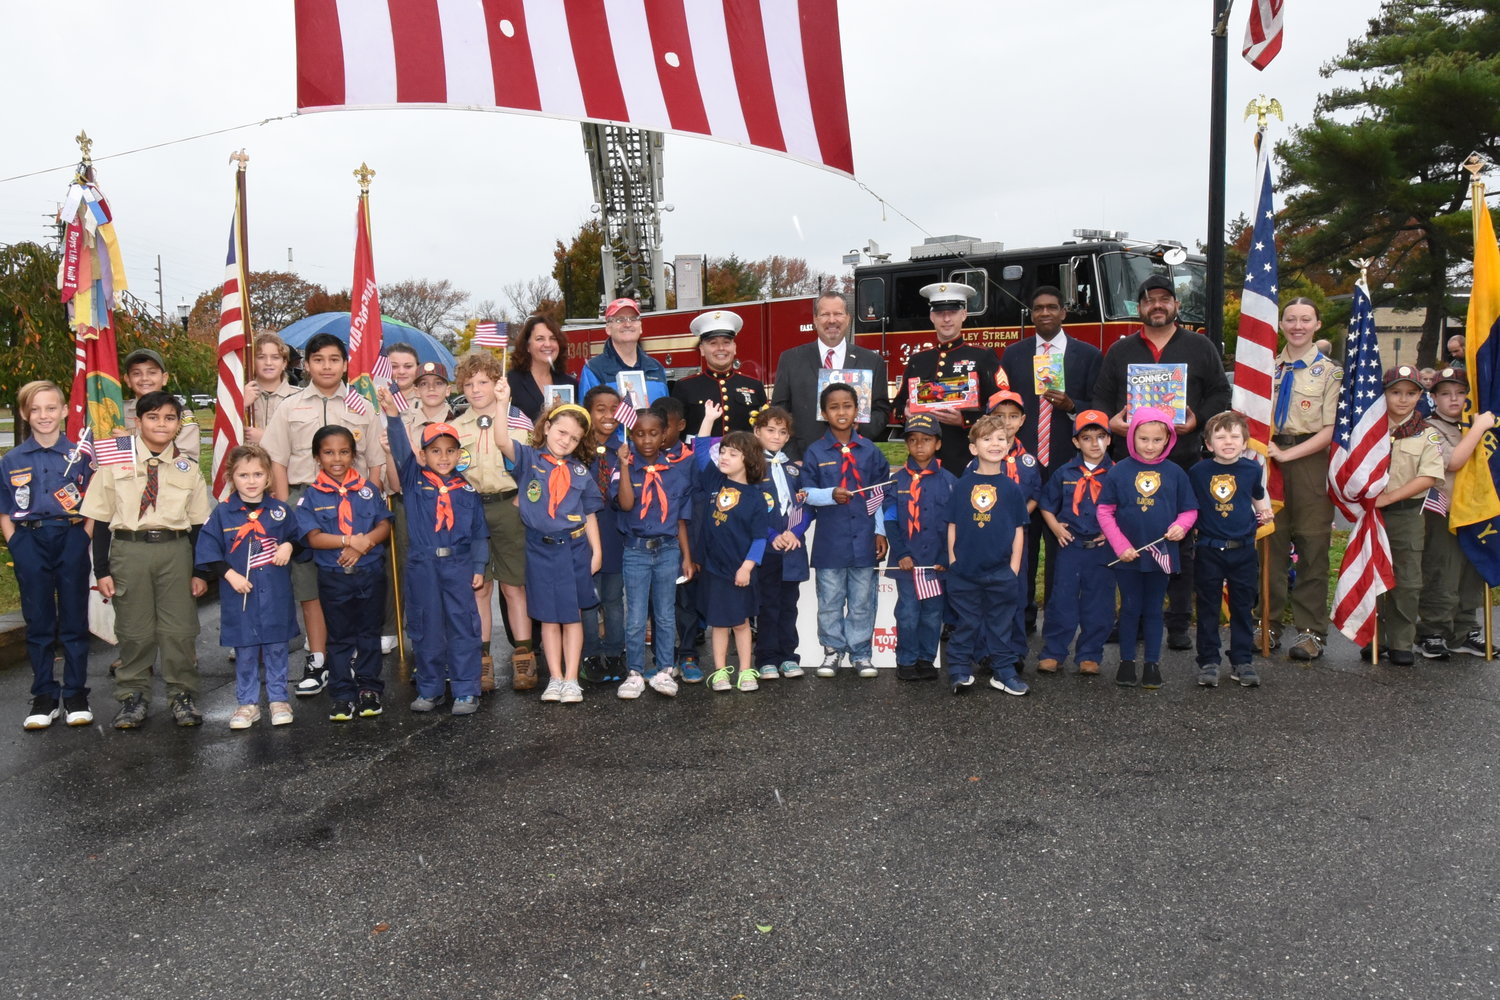 To cap off its Veterans Day ceremony, the village officially kicked off their Toys for Tots campaign drive with the United States Marine Corps in collaboration with the Valley Stream Chamber of Commerce.